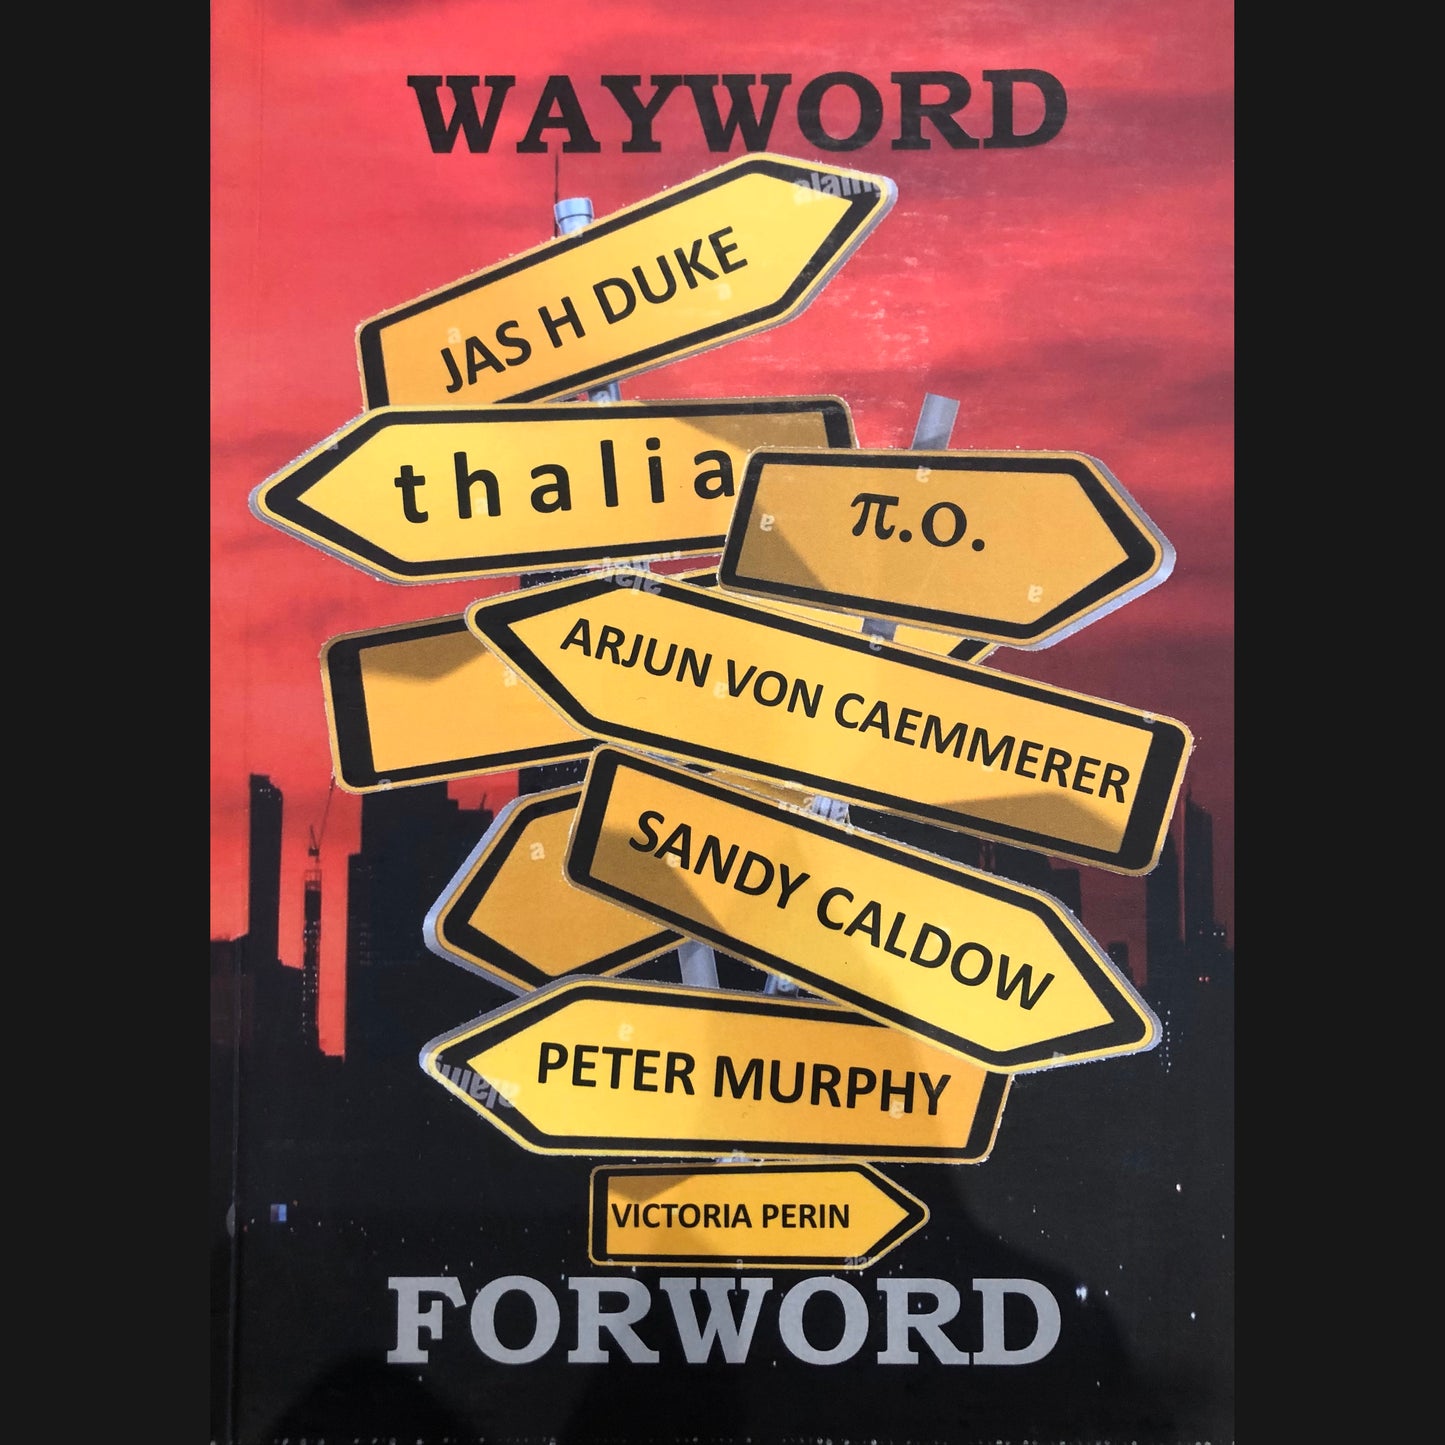 WAYWORD FORWARD - "AN ANTHOLOGY OF CONCRETE POETRY" BOOK